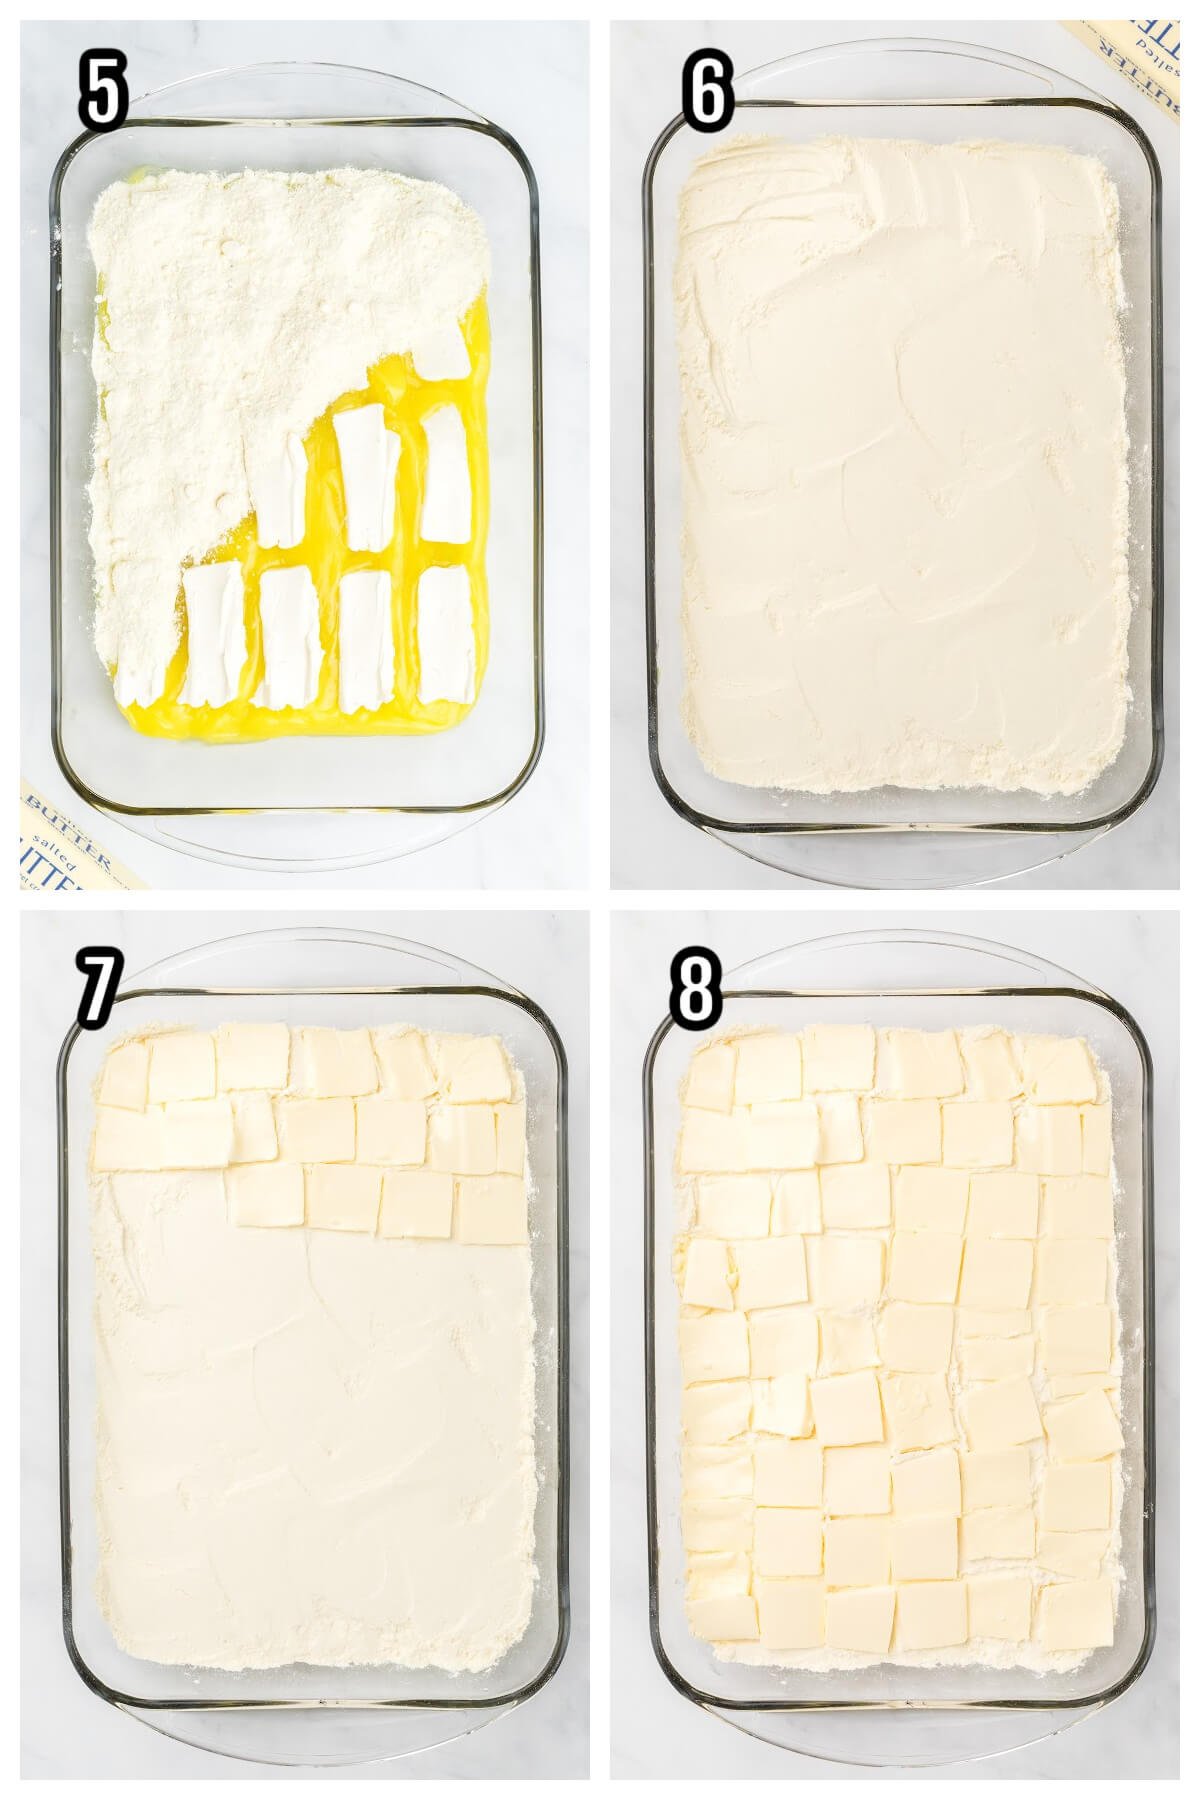 Second set of four steps to making the recipe for lemon cake with cream cheese. 